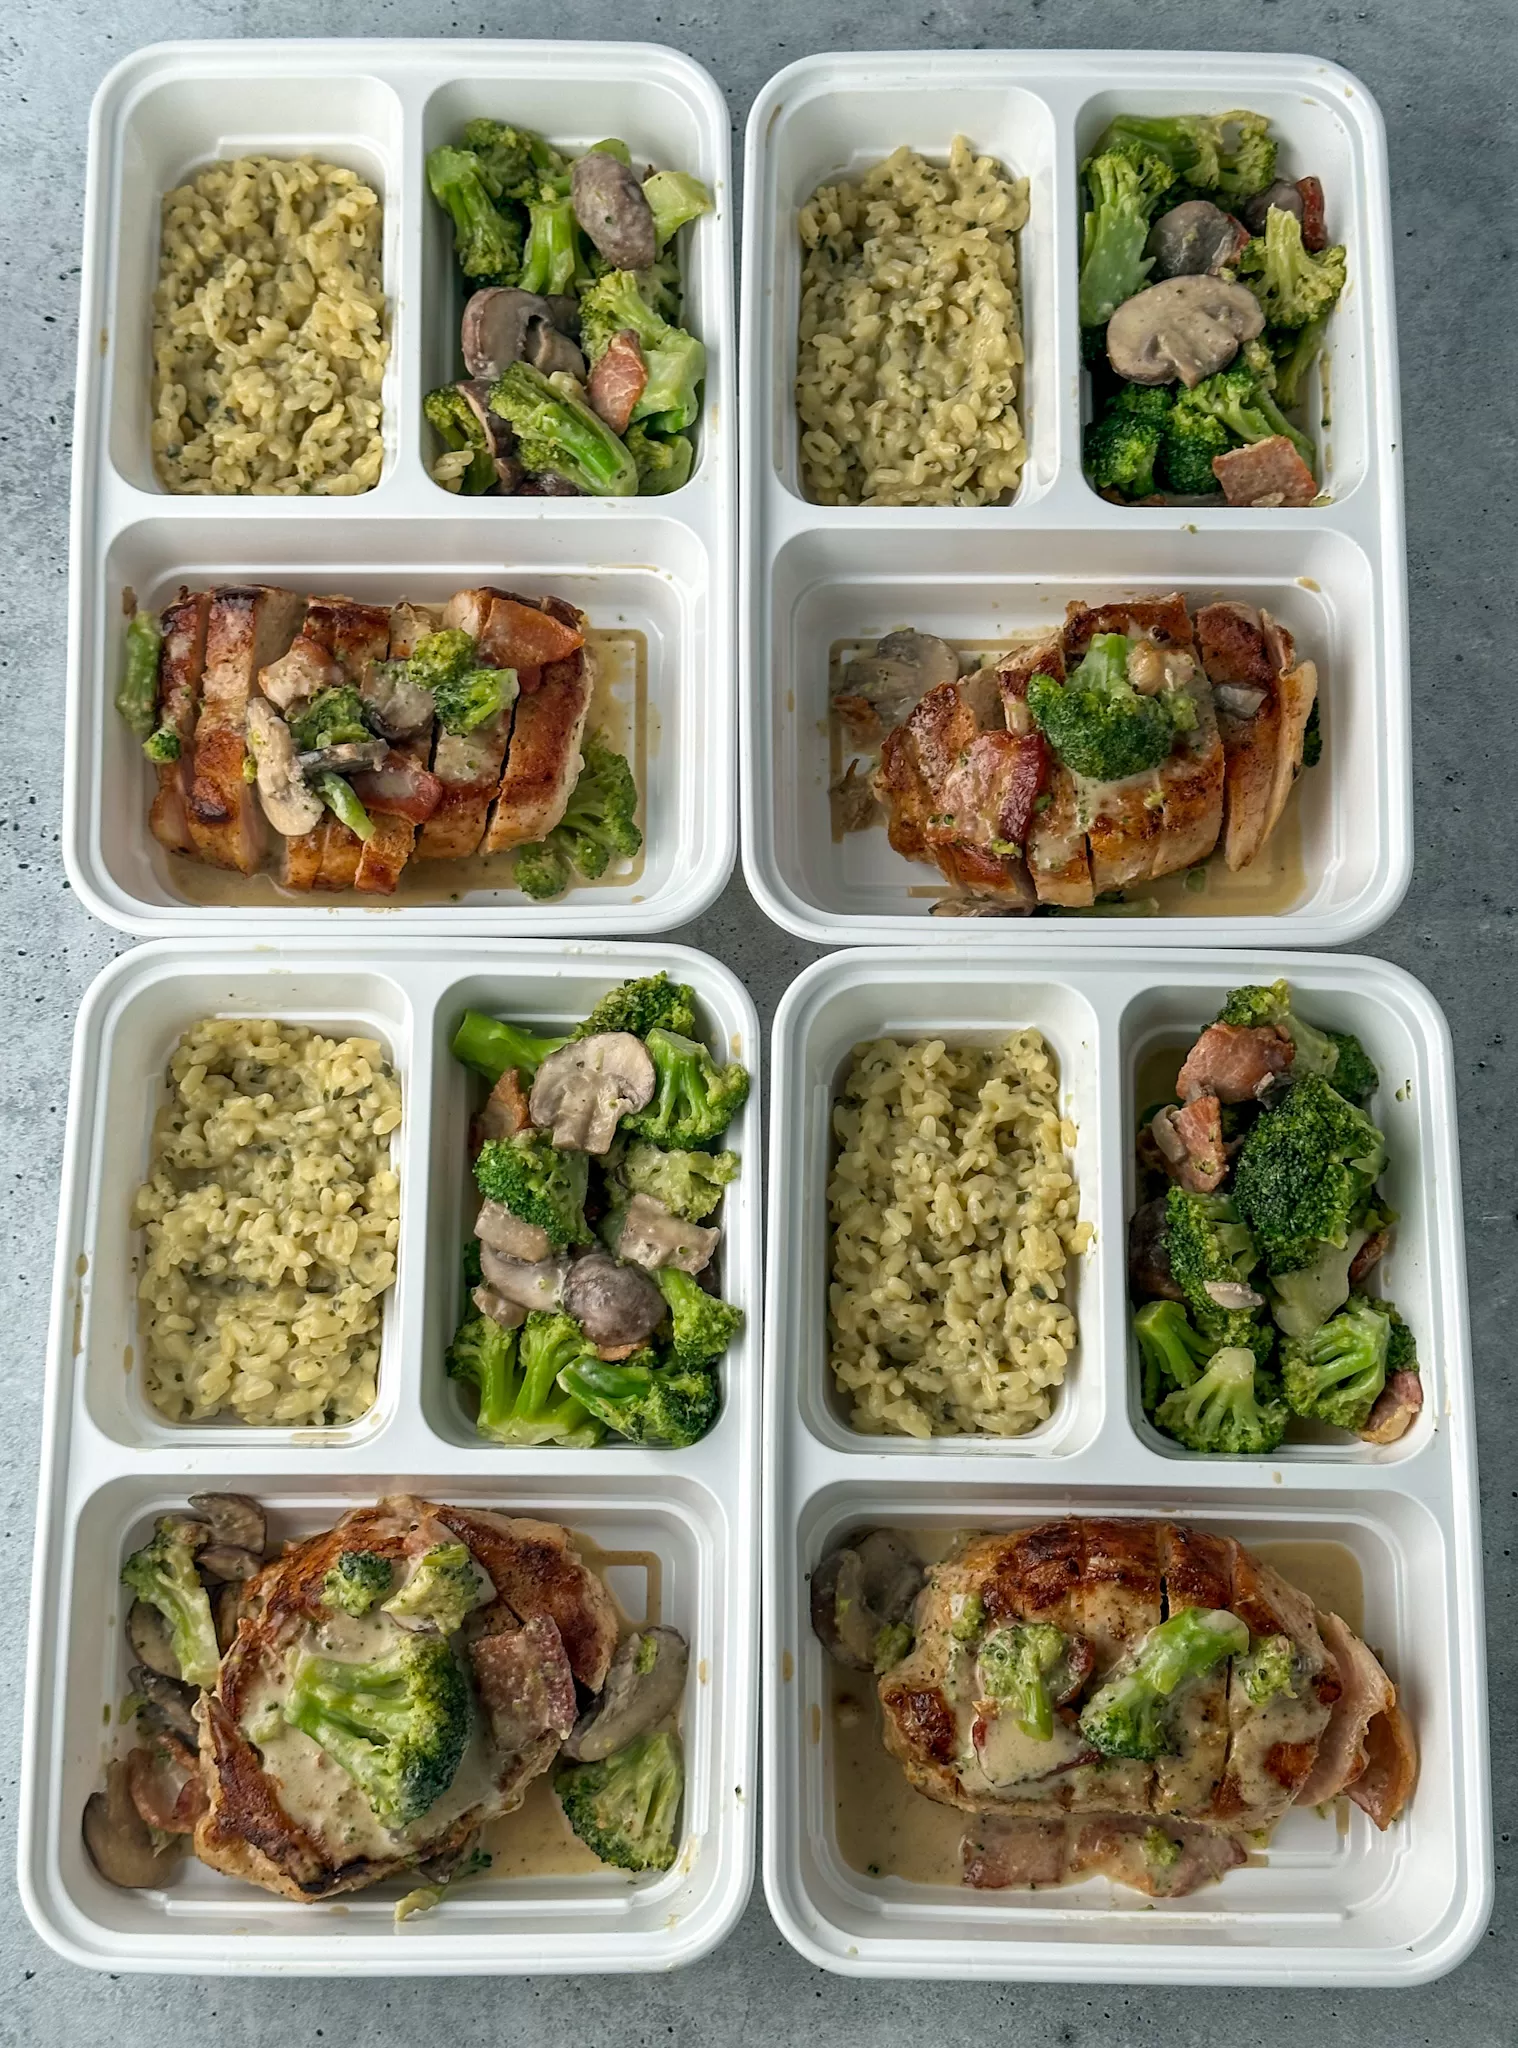 Skillet Bacon Broccoli Pork Chops Meal Prep in containers